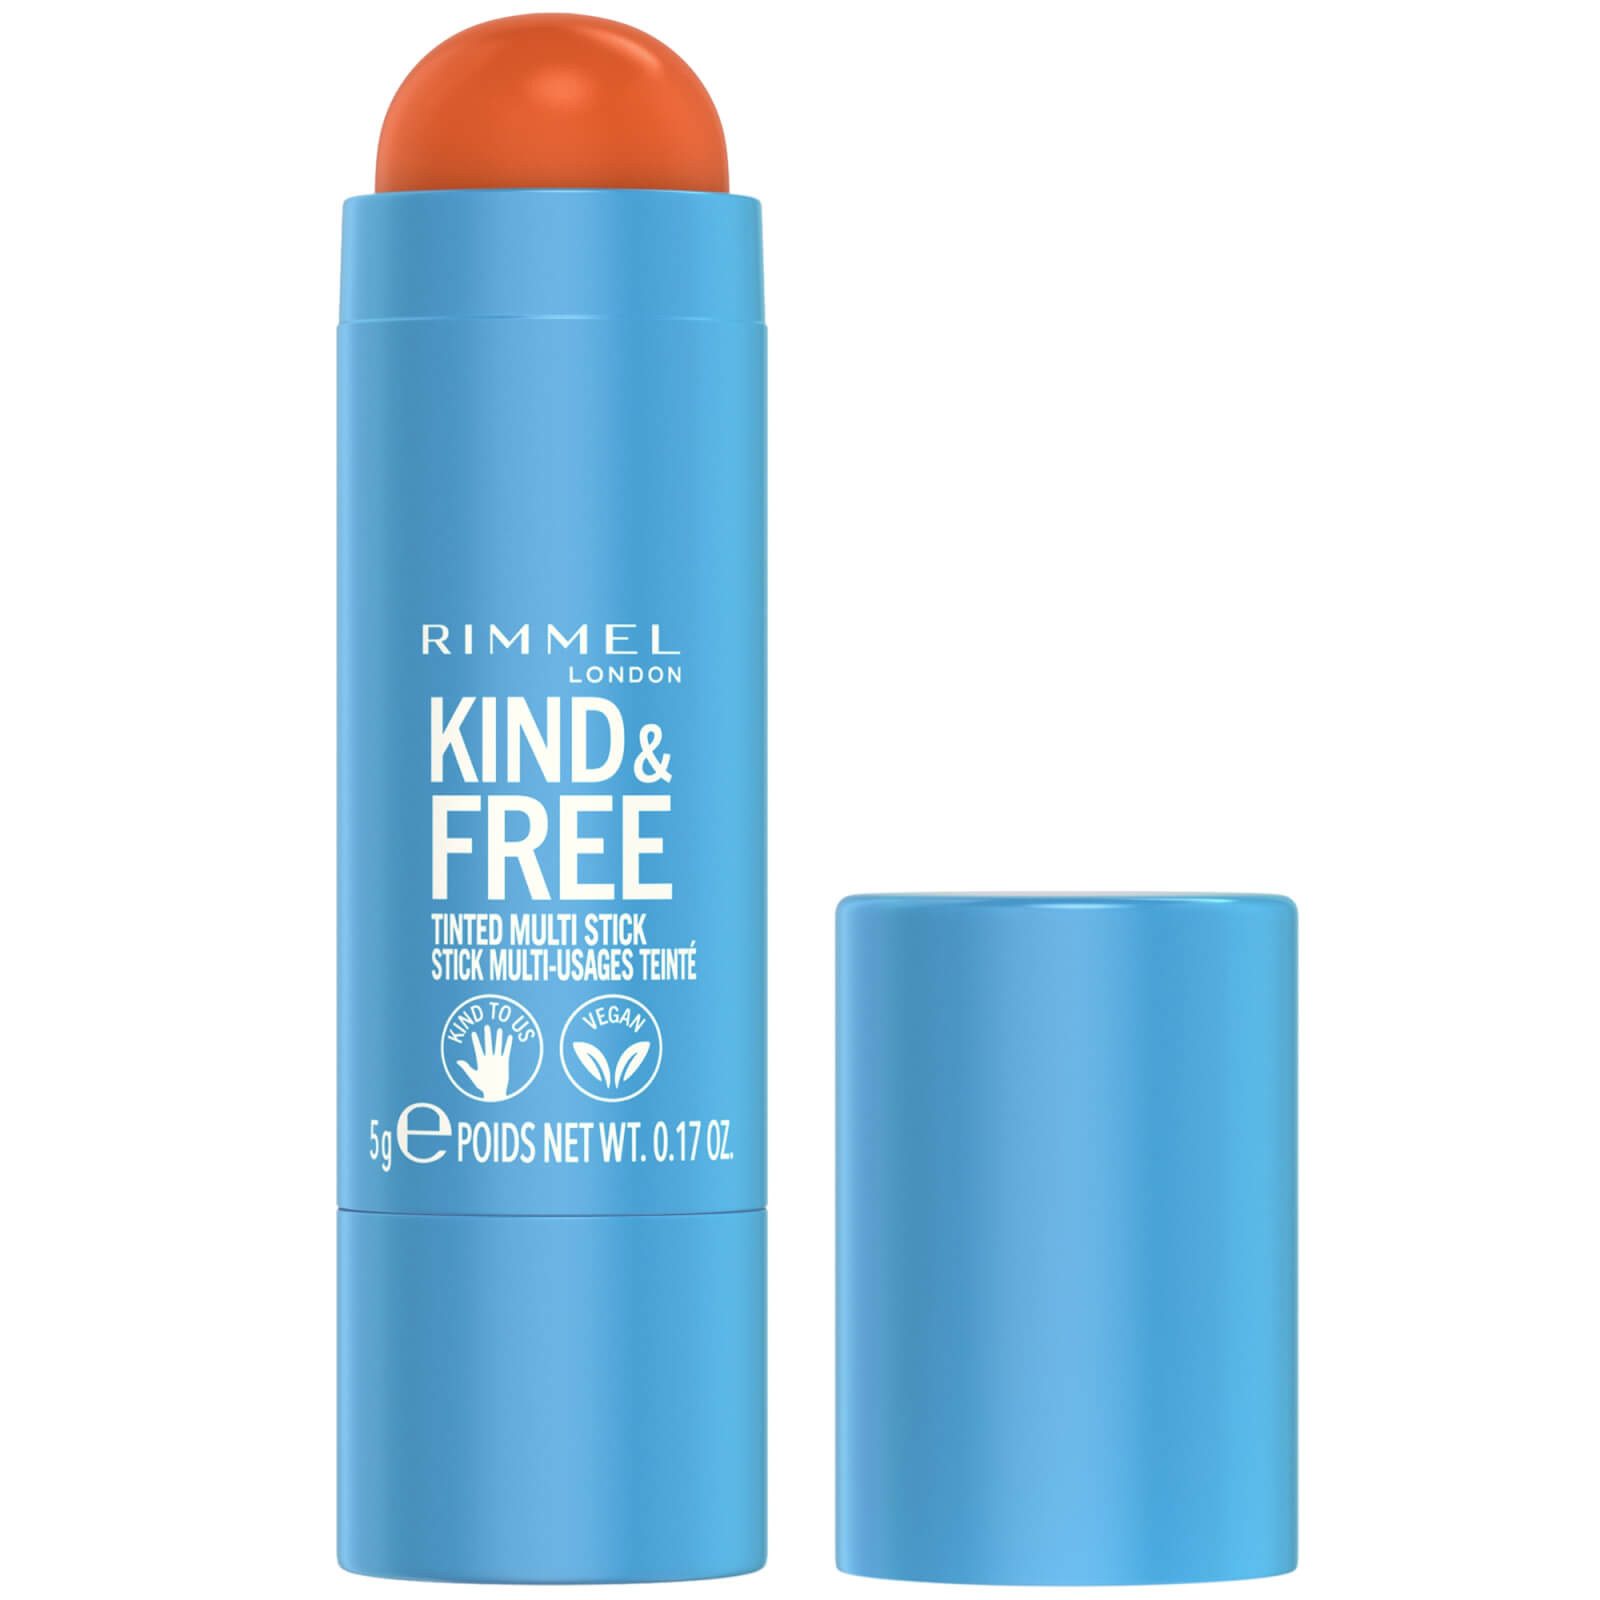 Rimmel Kind And Free Multi-stick 5ml (various Shades) - 004 Tangerine Dream